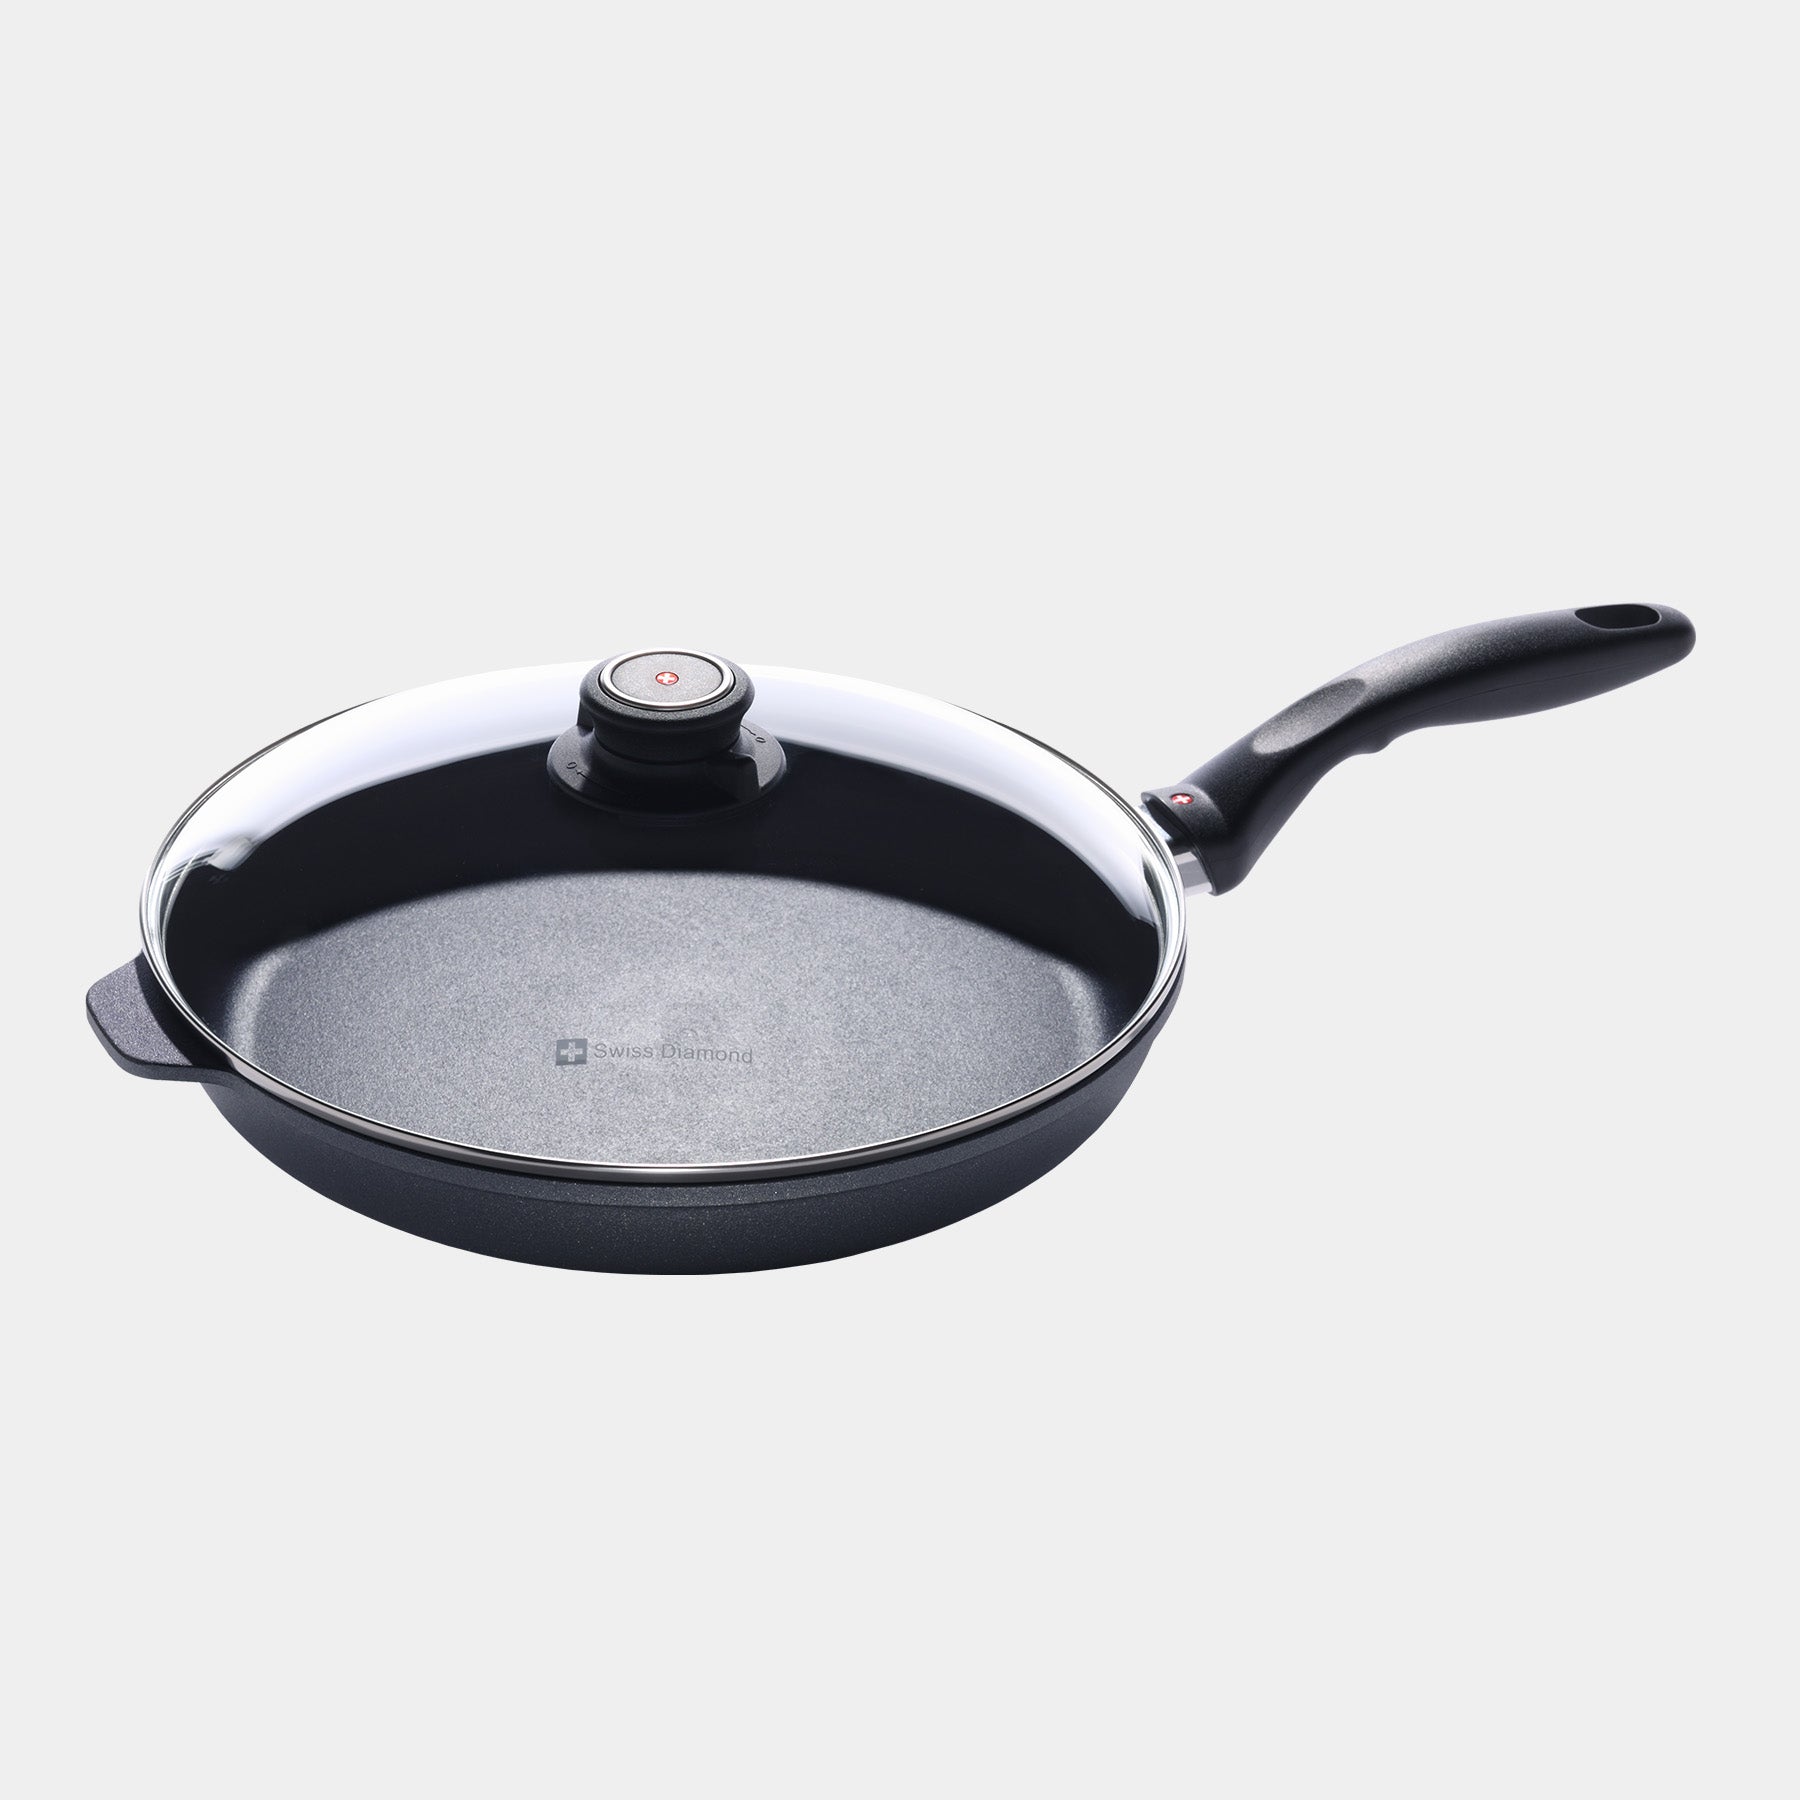 HD Nonstick 11" Fry Pan with Glass Lid - Induction